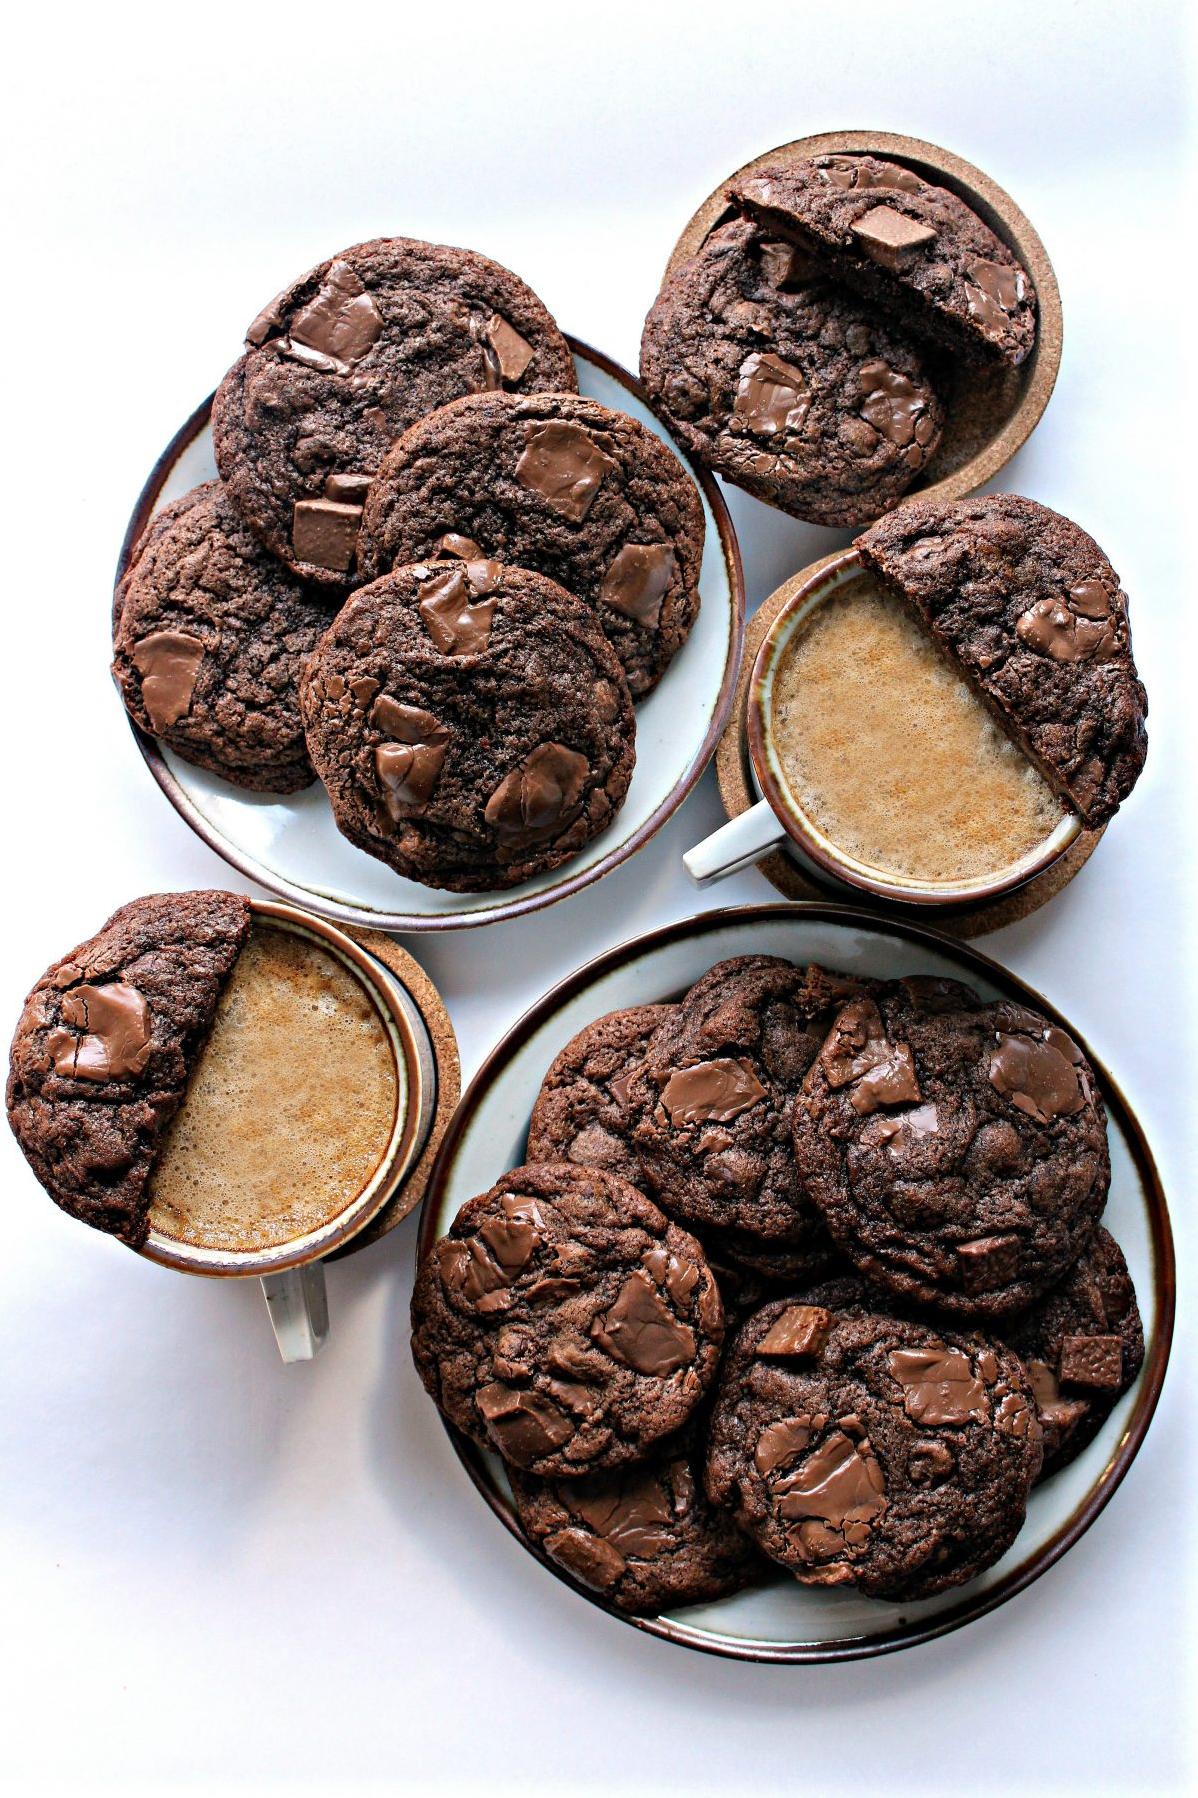  Your taste buds will thank you for trying out this mocha cookie recipe.